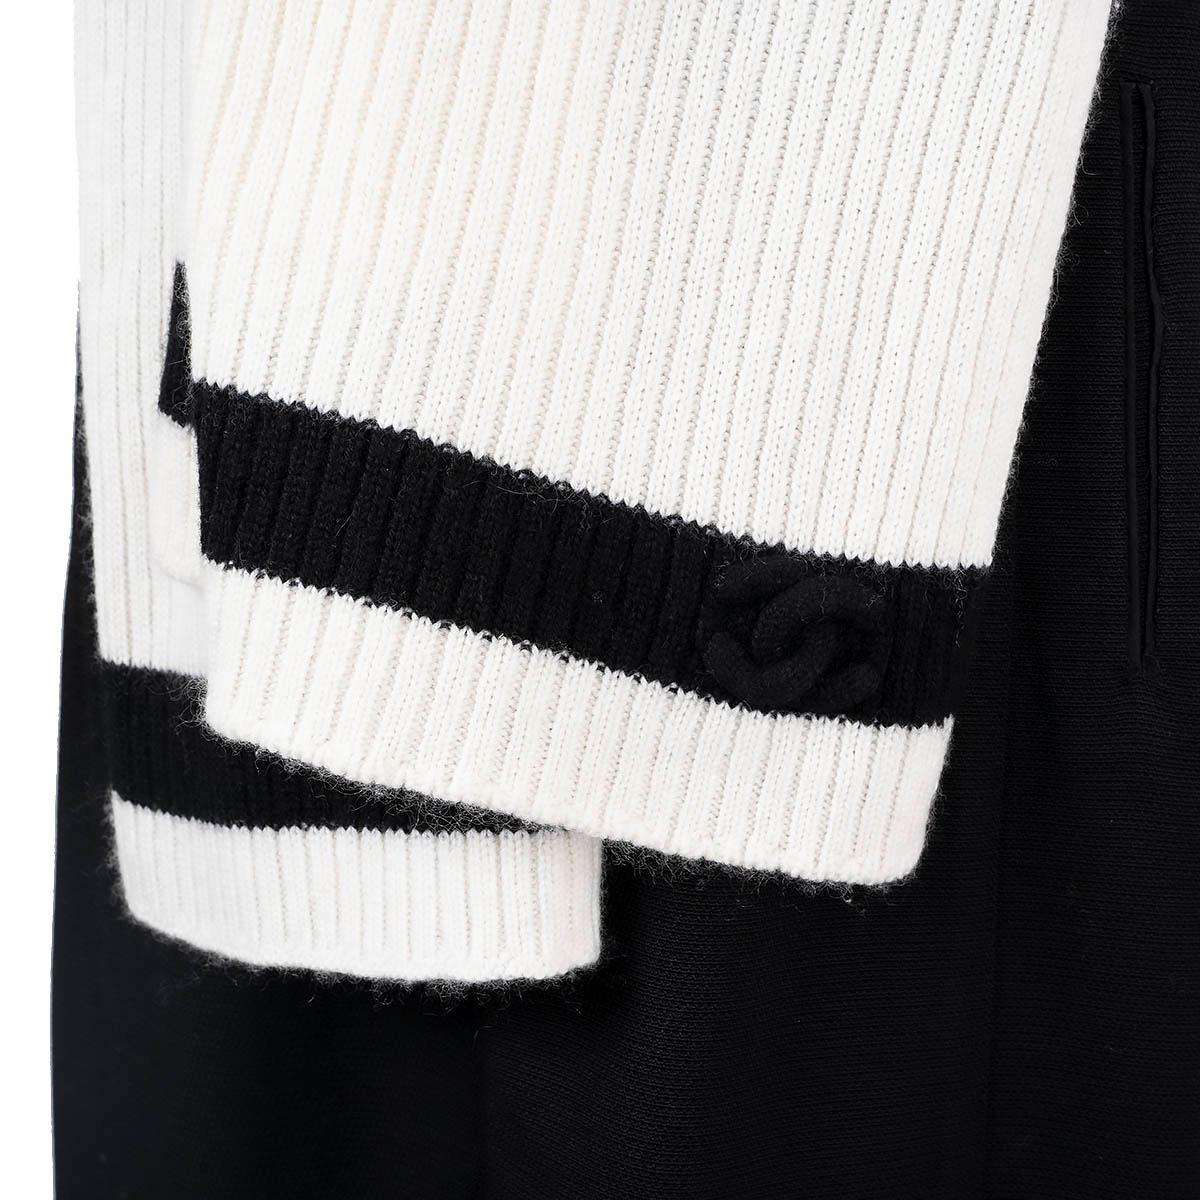 100% authentic Chanel rib-knit muffler in ivory cashmere (100%) with black stripe and CC logo.  Has been worn and is in excellent condition. 

Measurements
Width	36cm (14in)
Length	110cm (42.9in)

All our listings include only the listed item unless